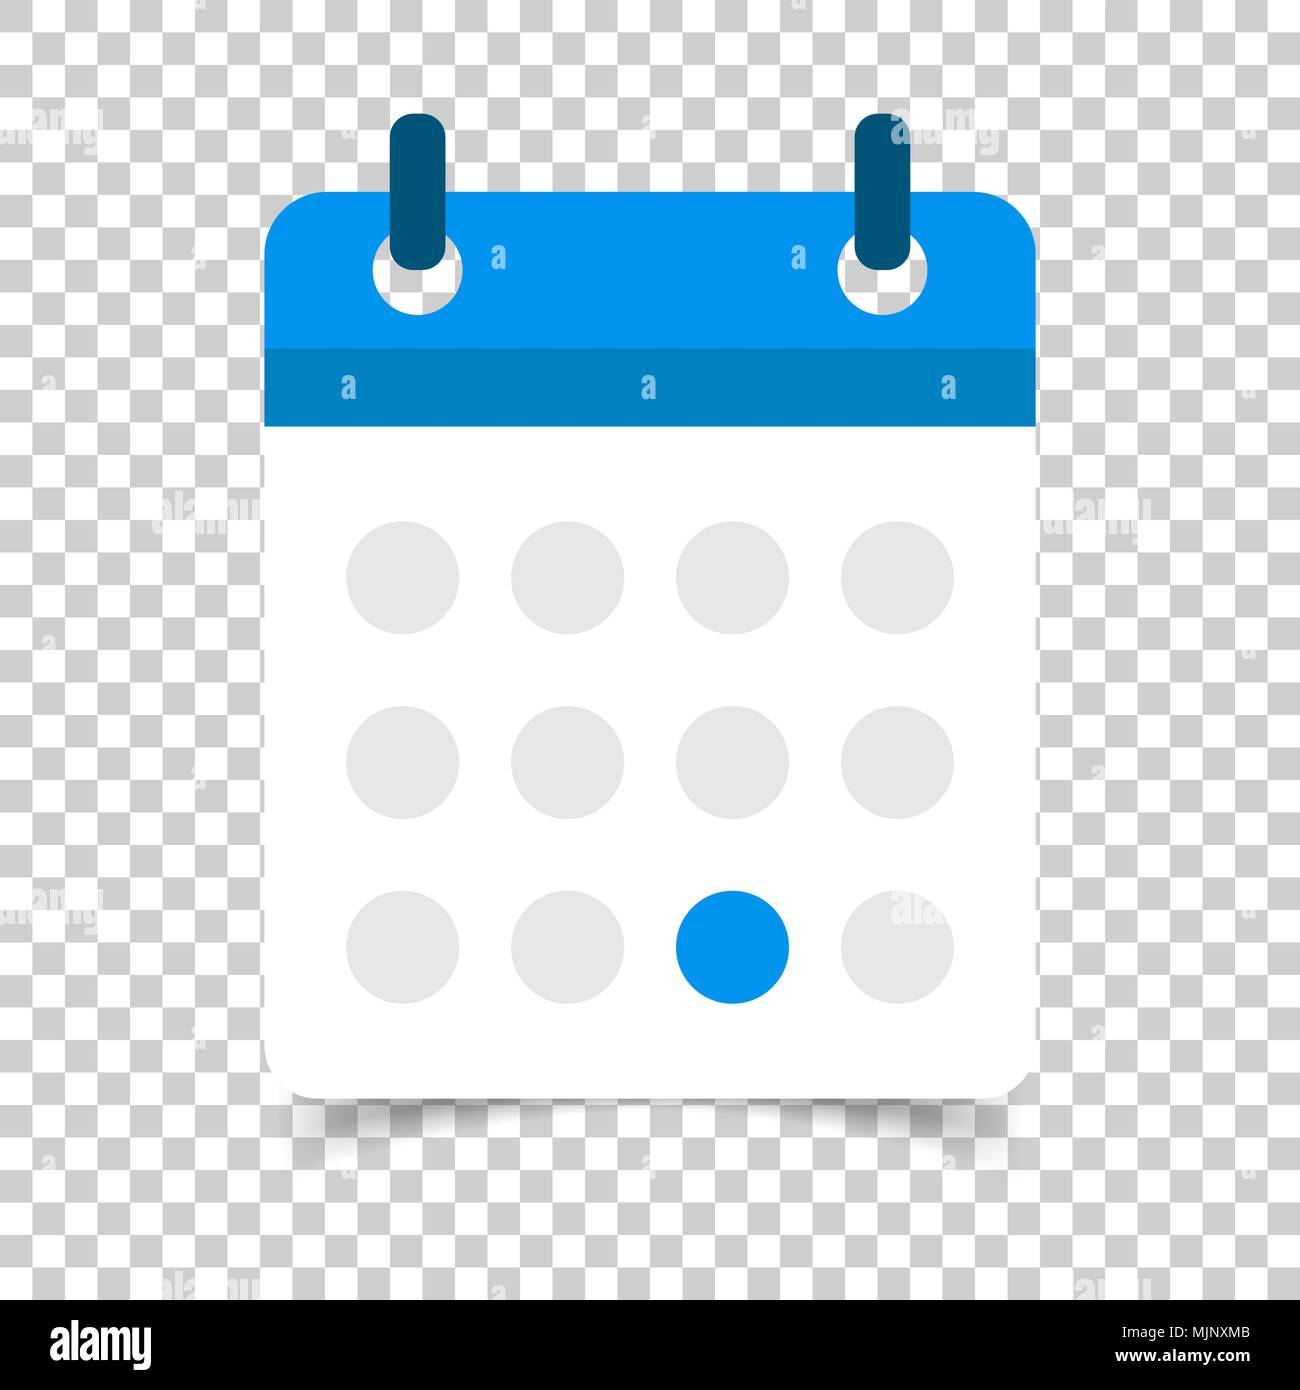 Calendar agenda vector icon in flat style. Reminder illustration on isolated transparent background. Calendar date concept. Stock Vector